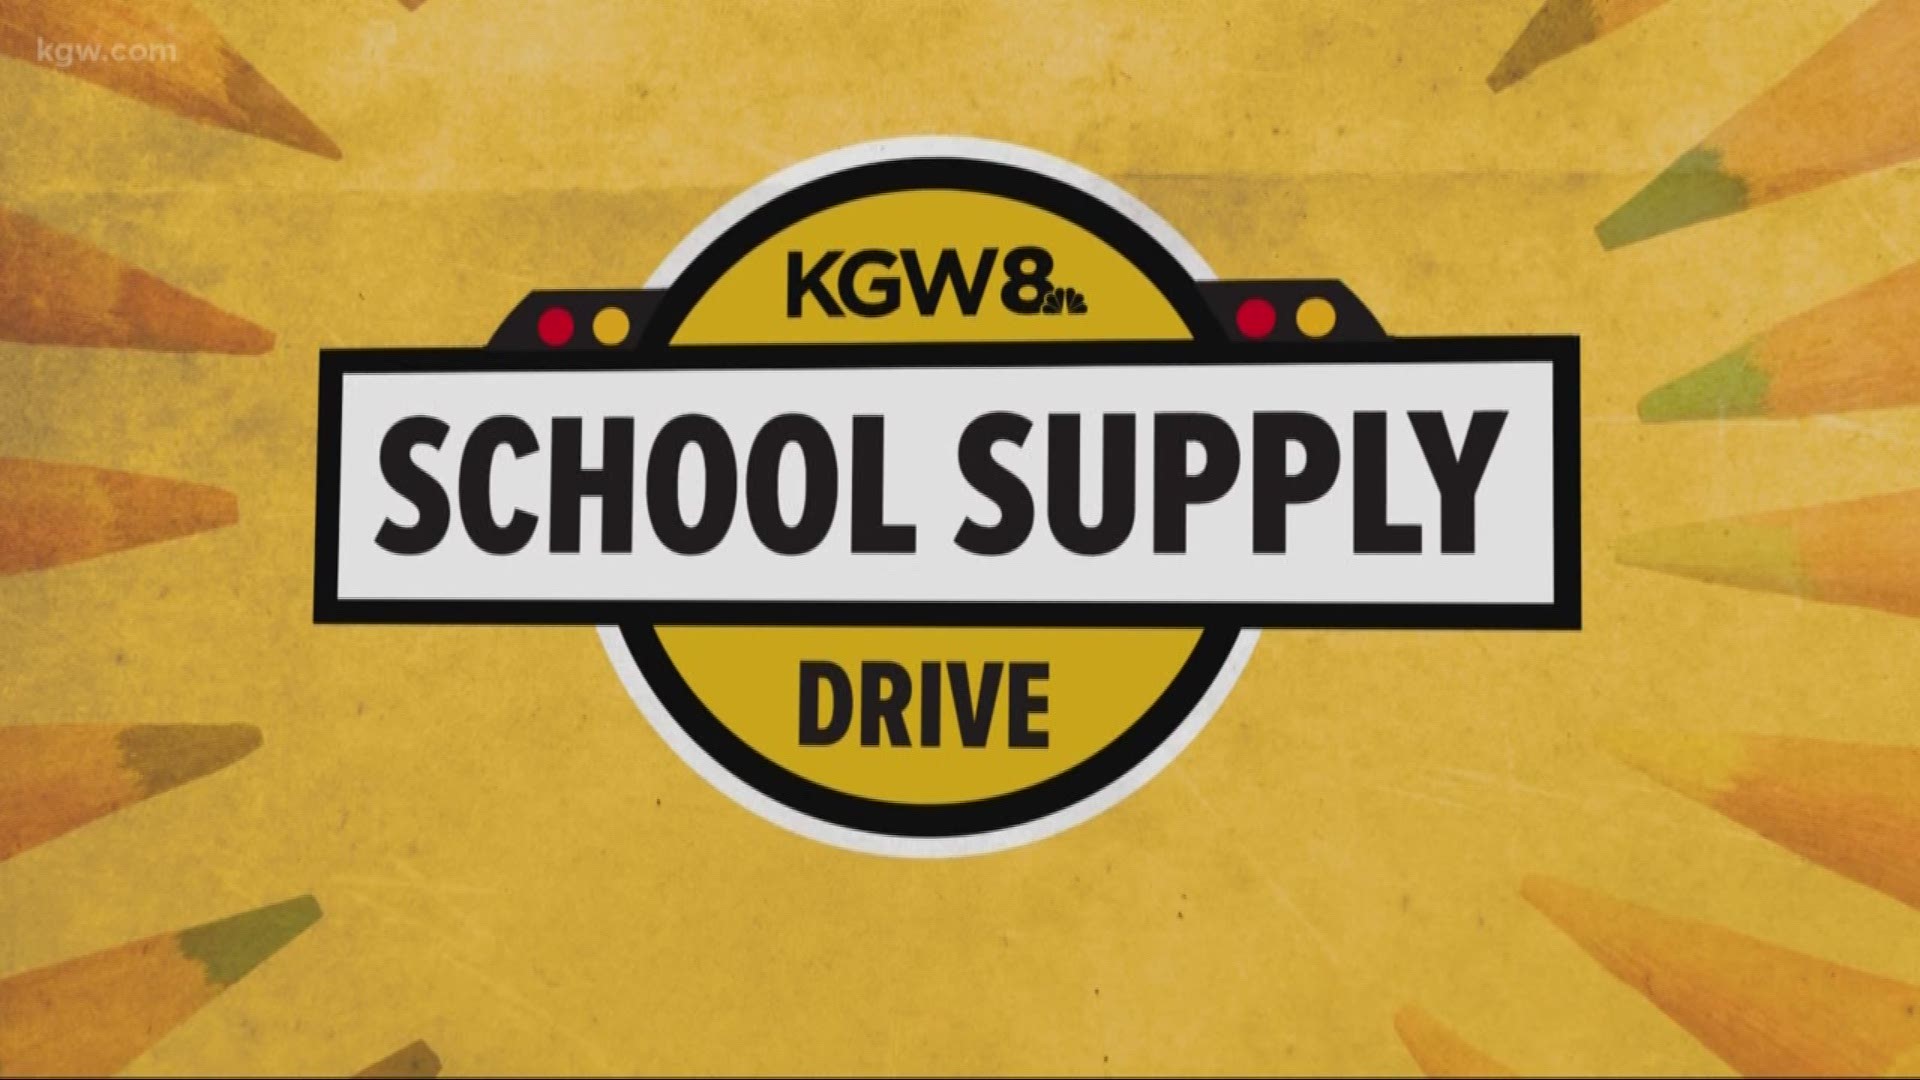 The KGW School Supply Drive is underway right now. Donate and help kids get ready for the school year.
kgw.com/school
#TonightwithCassidy